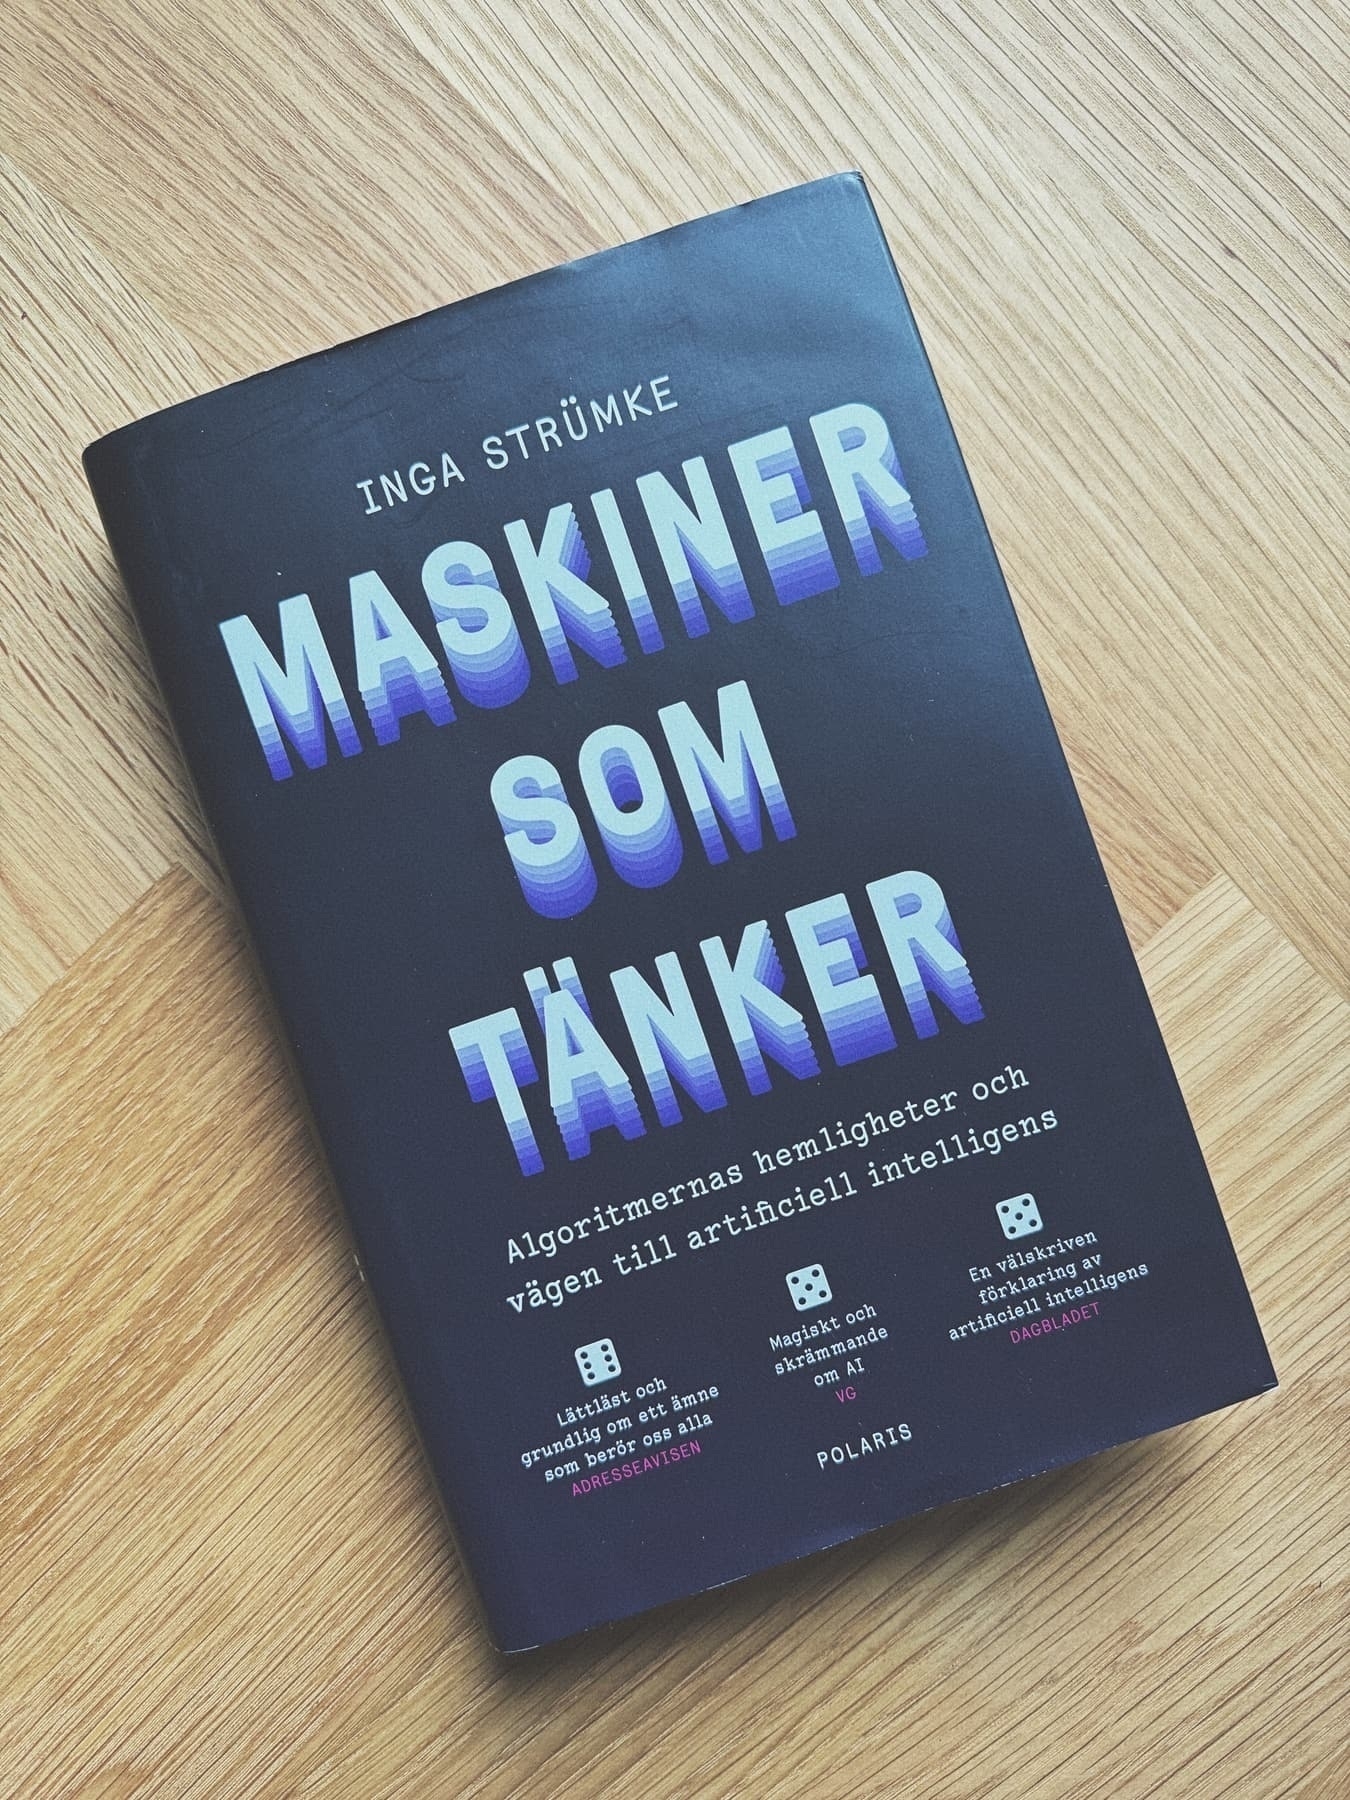 A book with the title Maskiner som tänker by Inga Strümke resting on a wooden surface.